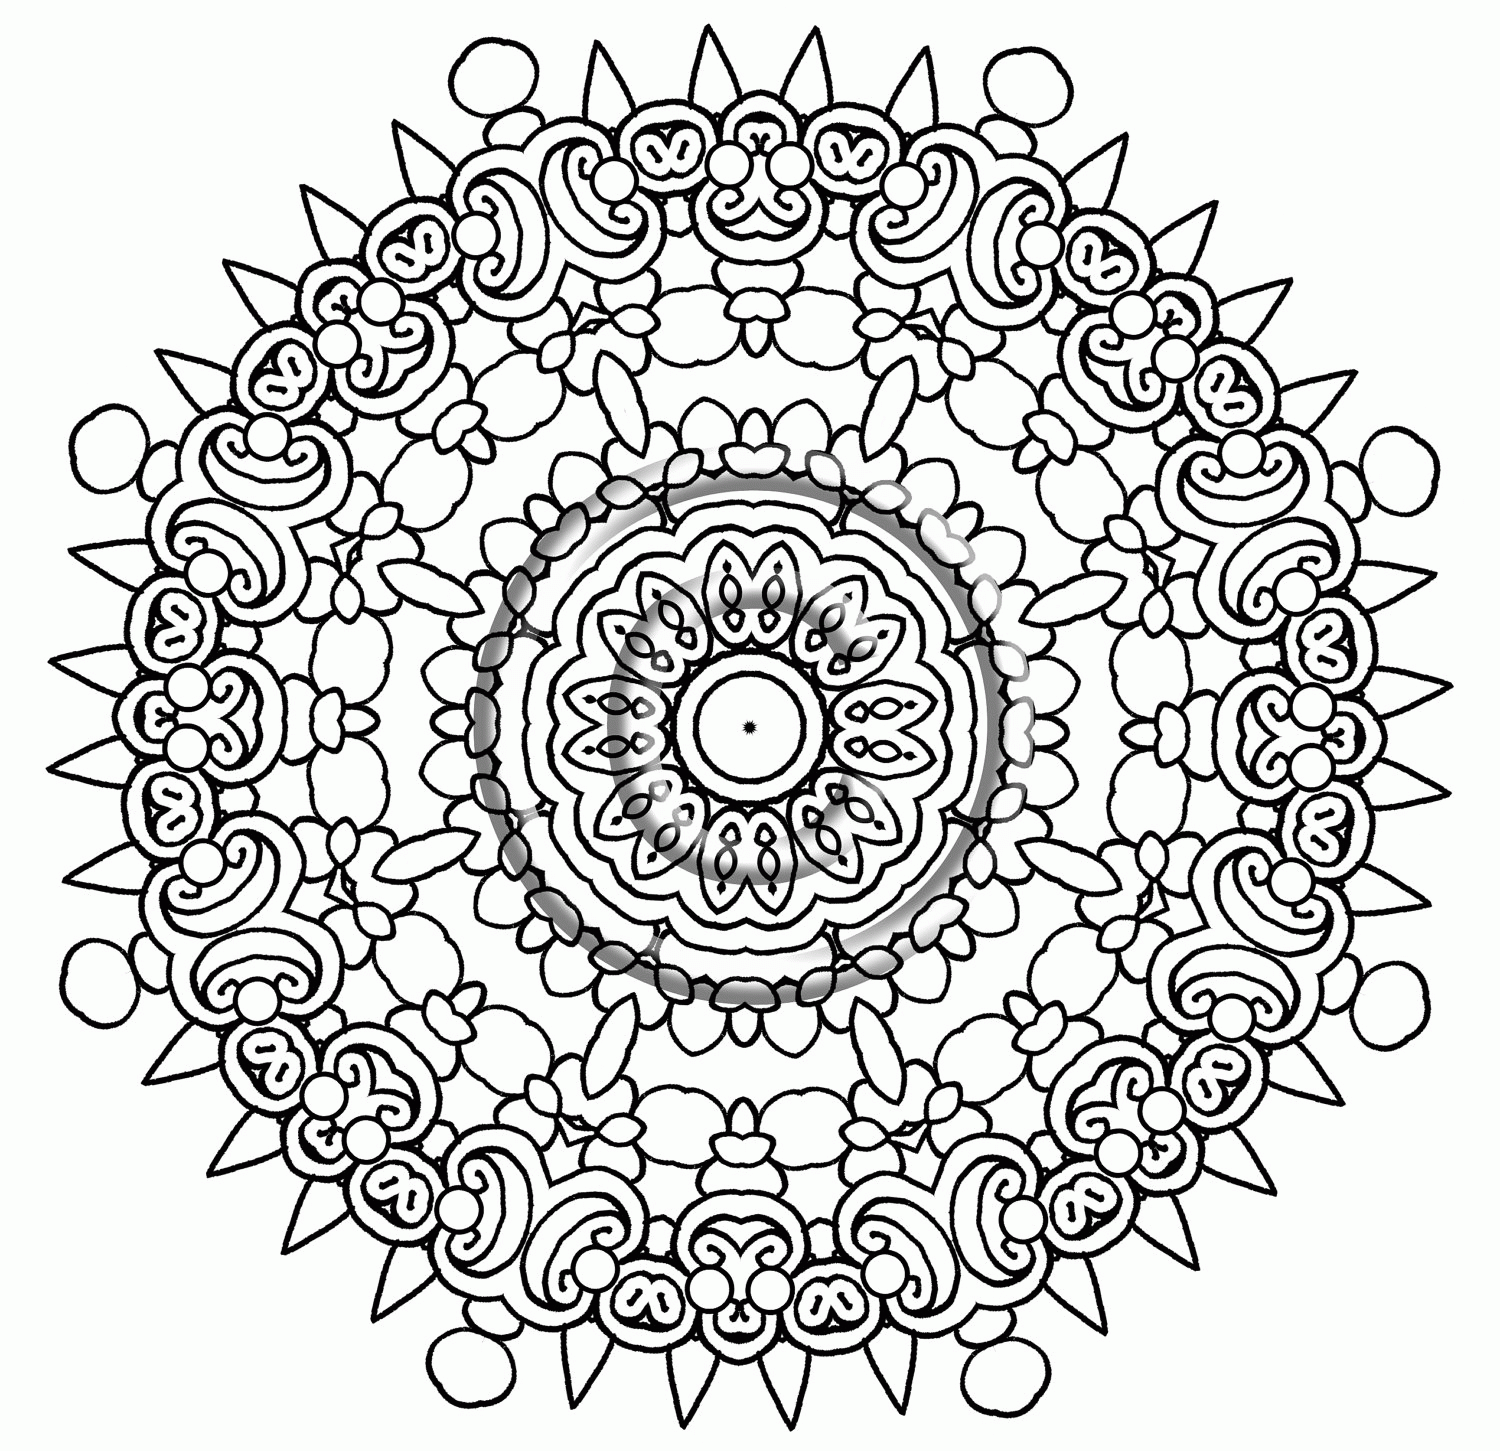 intricate mandala coloring pages - High Quality Coloring Pages